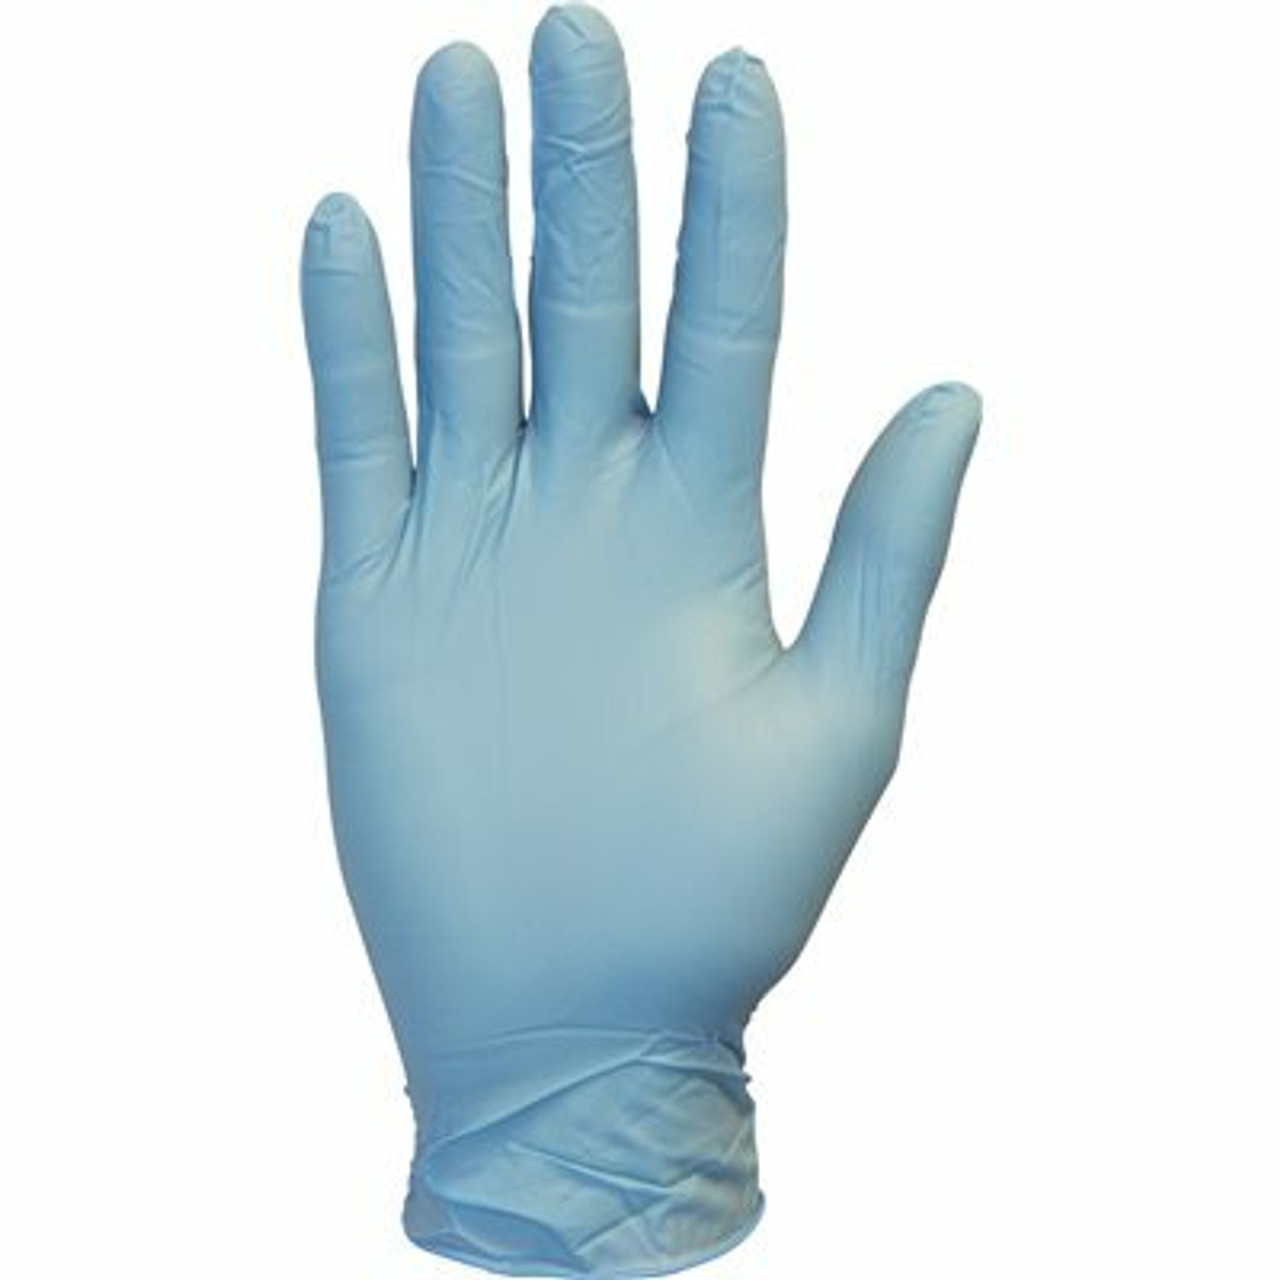 The Safety Zone Safety Zone Extra-Large Blue Nitrile Gloves Powder Free Latex Free (1000 Per Case)